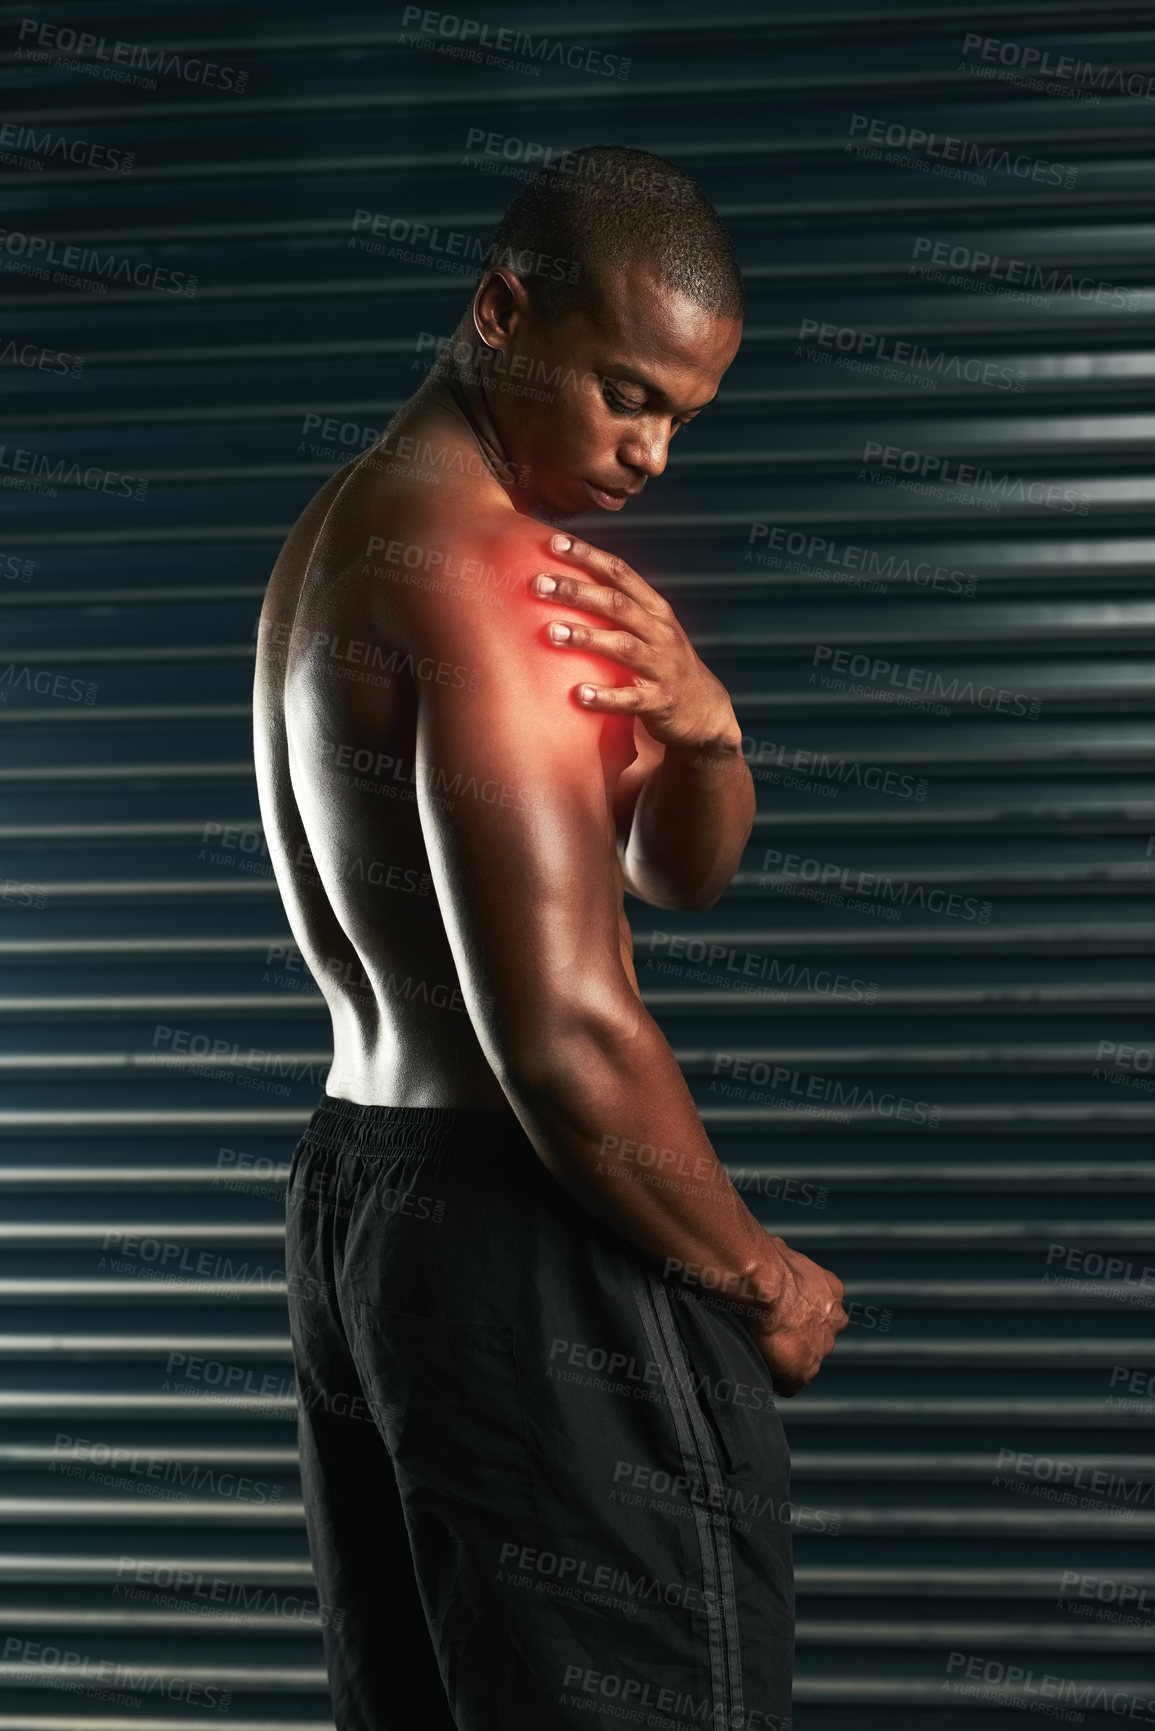 Buy stock photo Studio shot of an athletic young man examining a shoulder injury during his workout